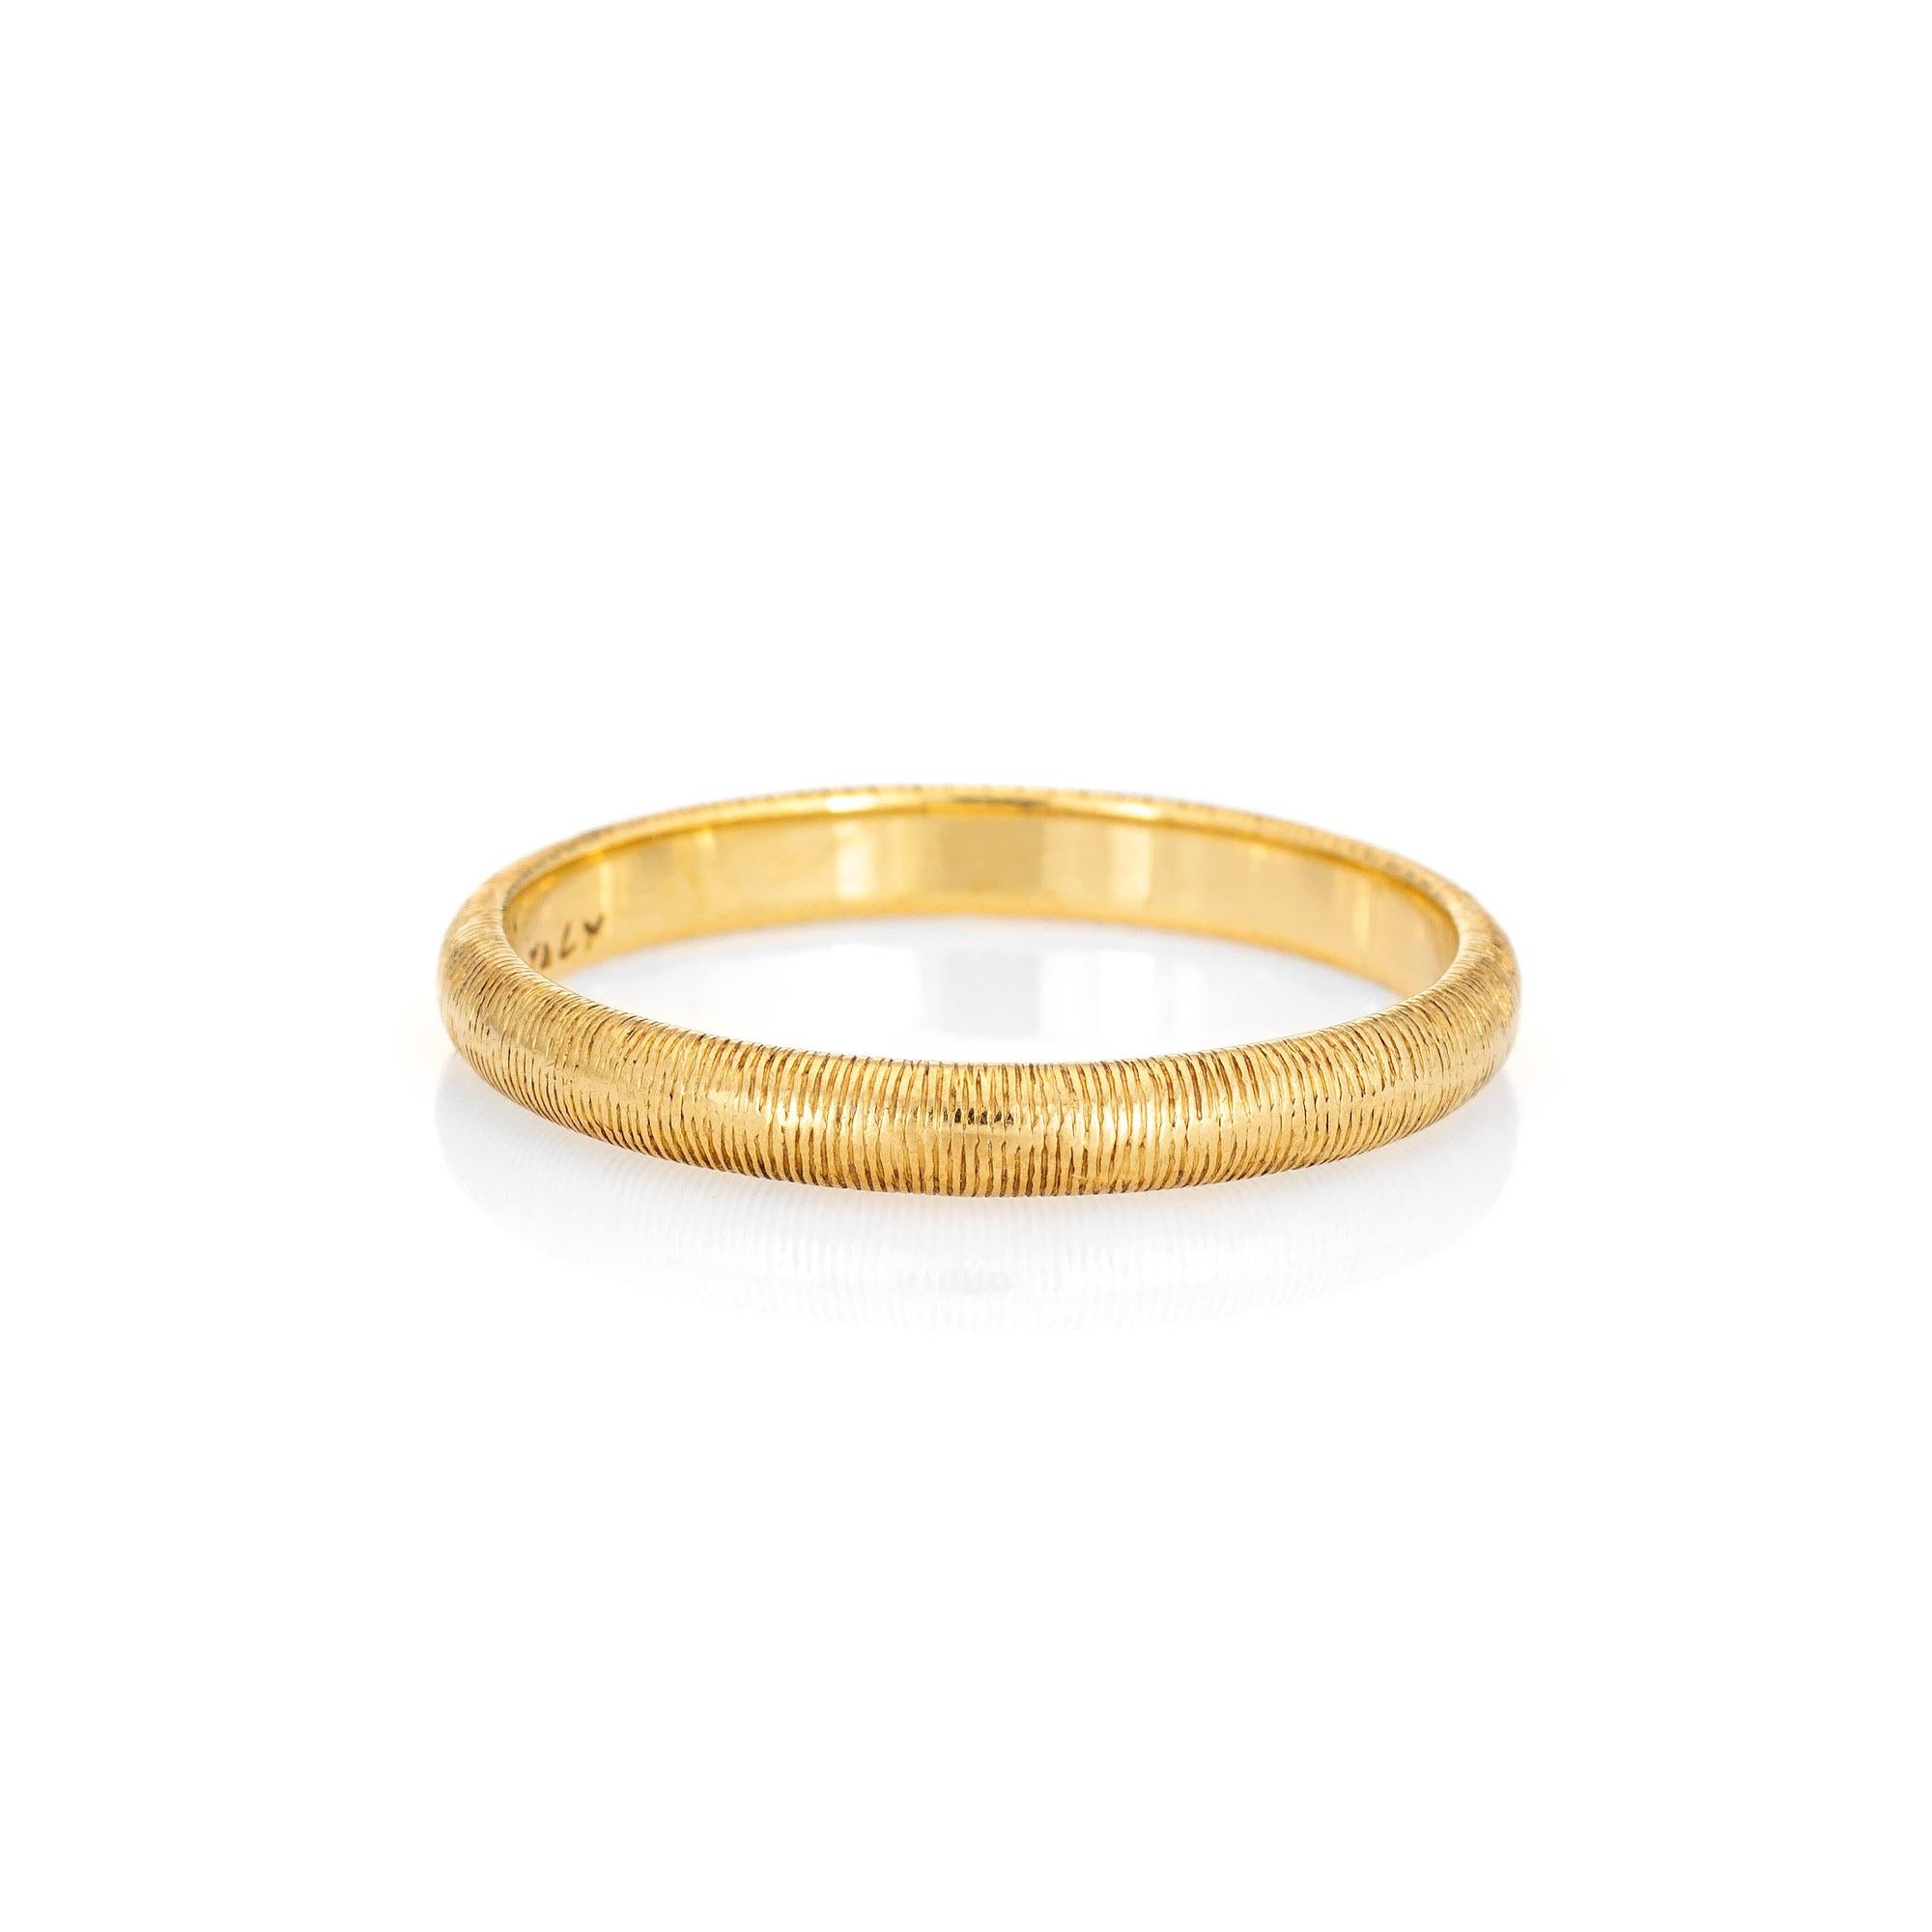 Vintage Mario Buccellati textured band crafted in 18k yellow gold.  

The band features fine linear detail, a hallmark of Buccellati jewelry. 
The ring is in very good condition. We have not cleaned it in order to preserve the patina and collector